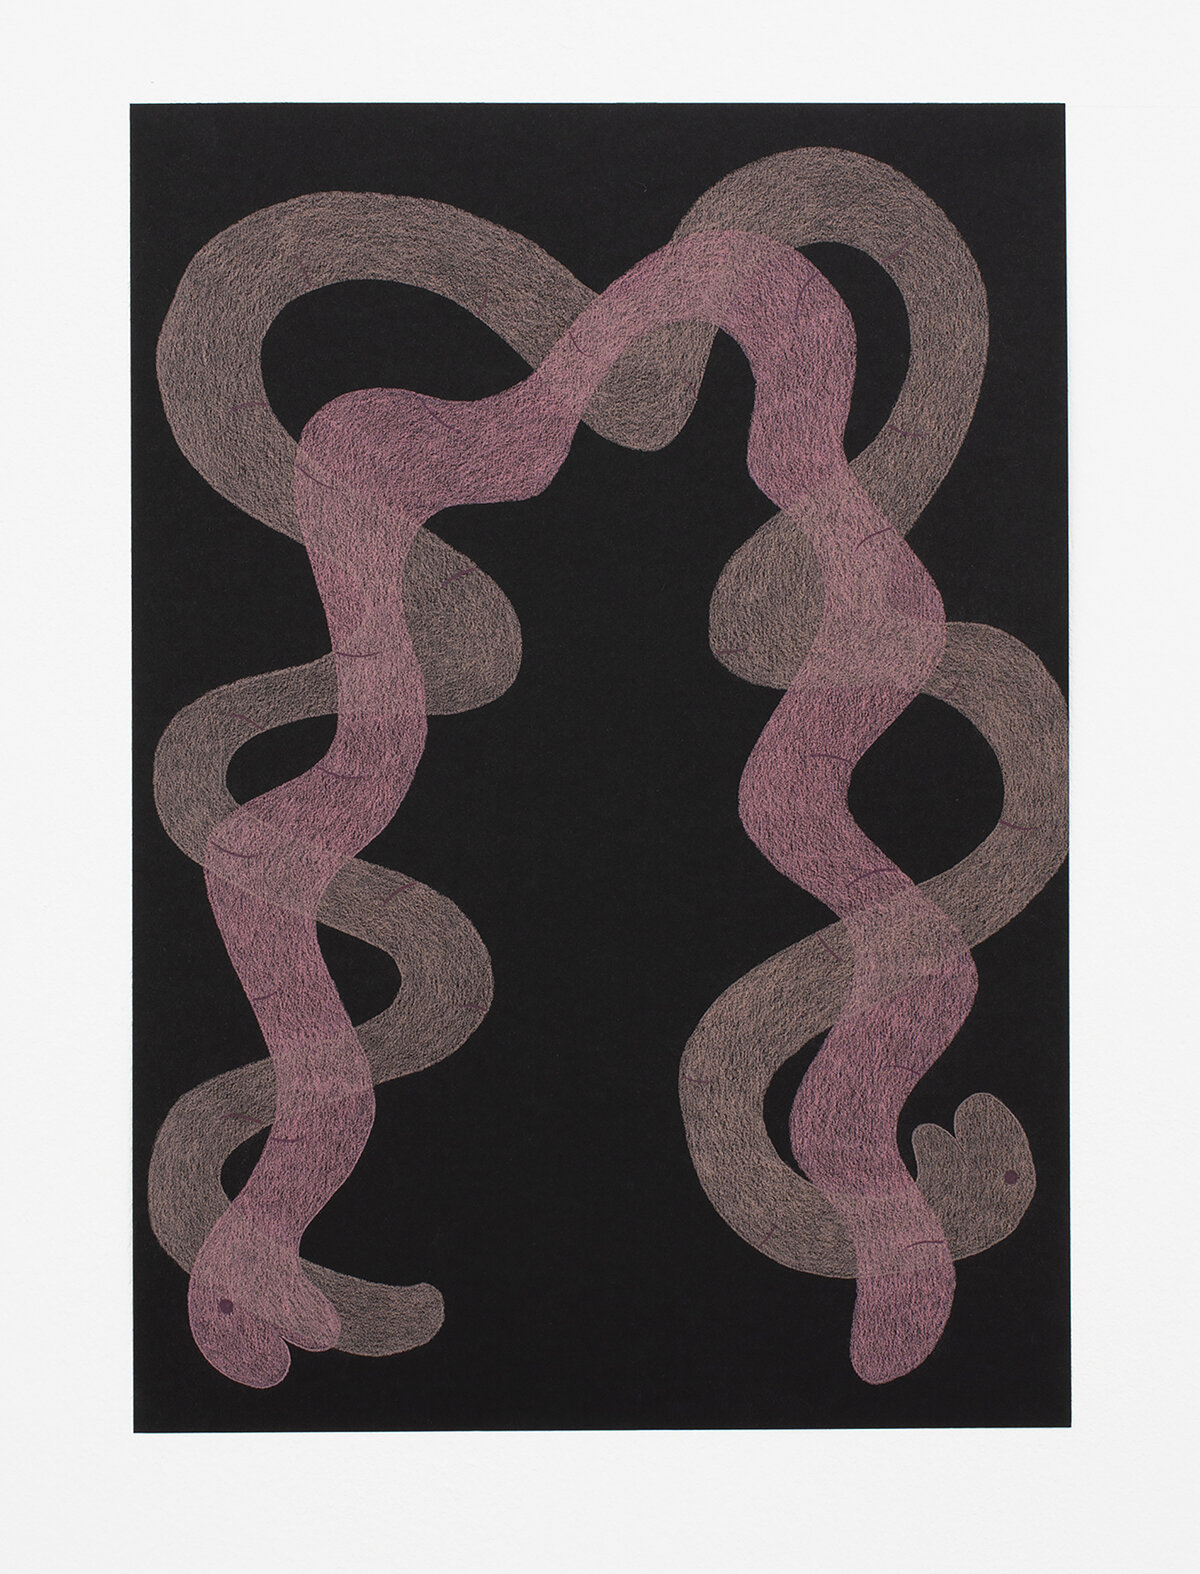 Jessica Groome, drawing from the series Worry Worms, coloured pencil on black paper, 30 x 42 cm, 2020 - 2021